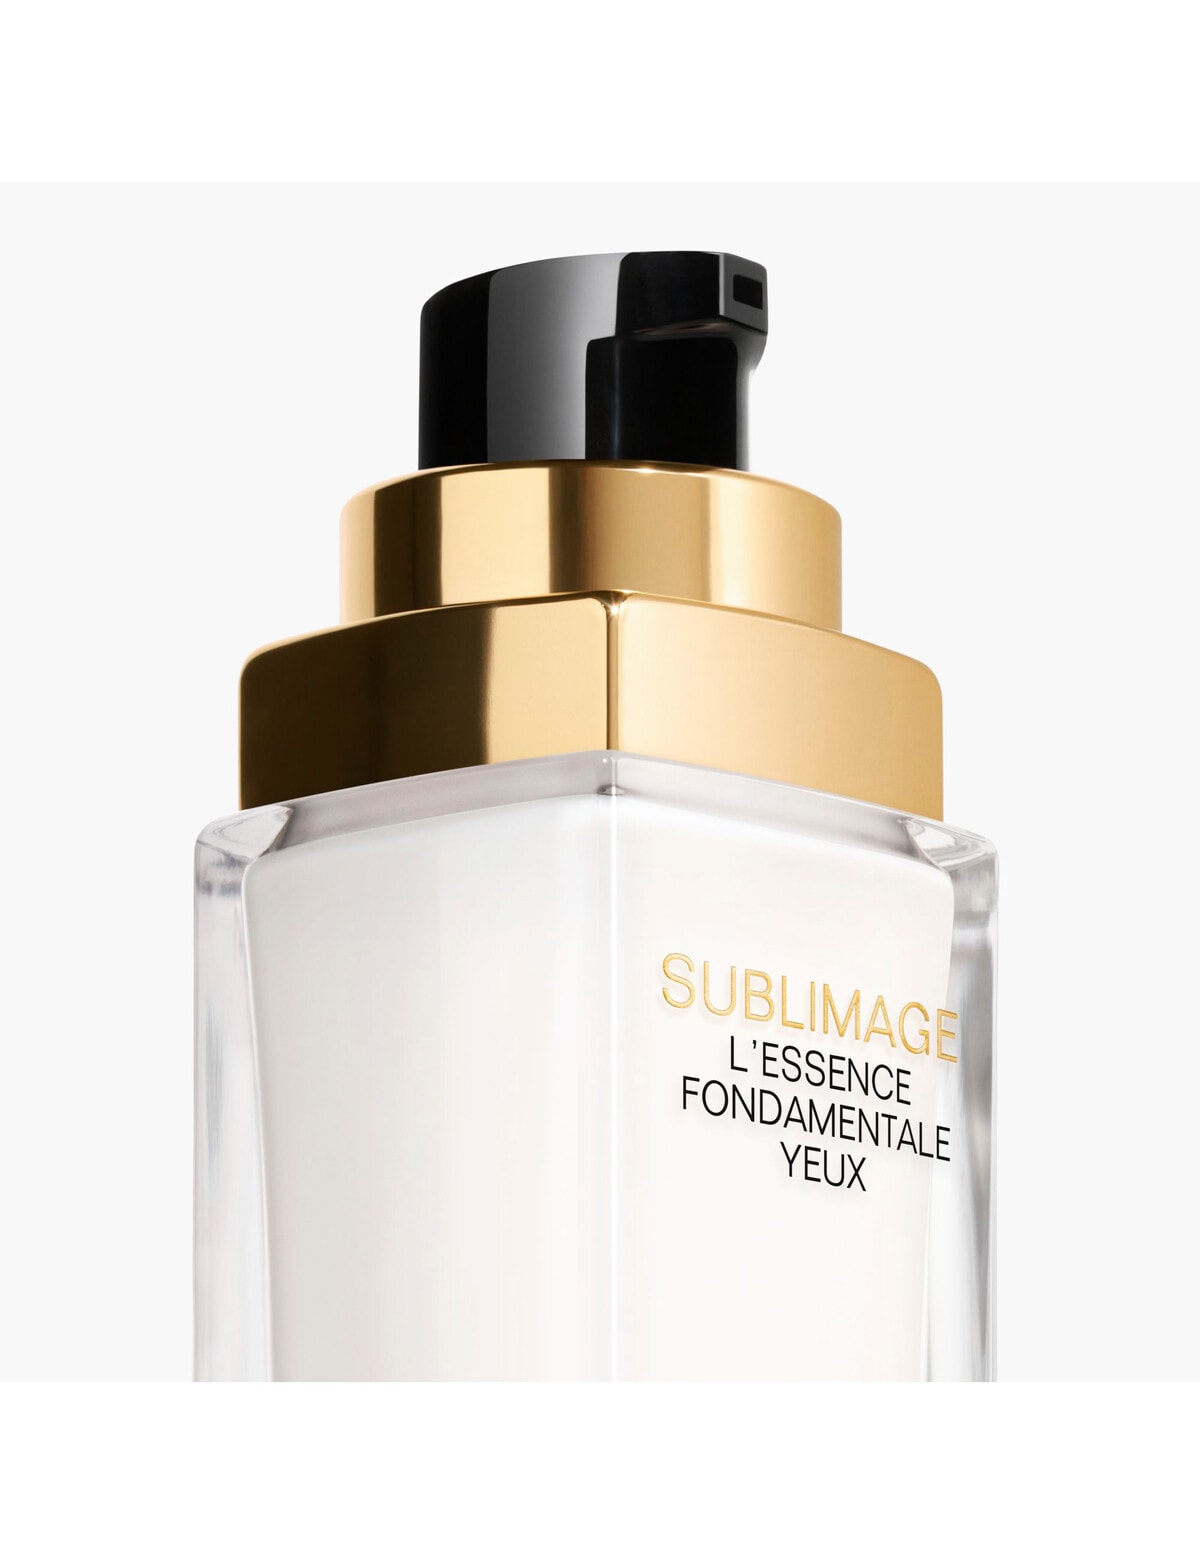 Firming Face & Neck Fundamental Concentrate - Chanel Sublimage L'Essence  Fondamentale Ultimate Redefining Concentrate